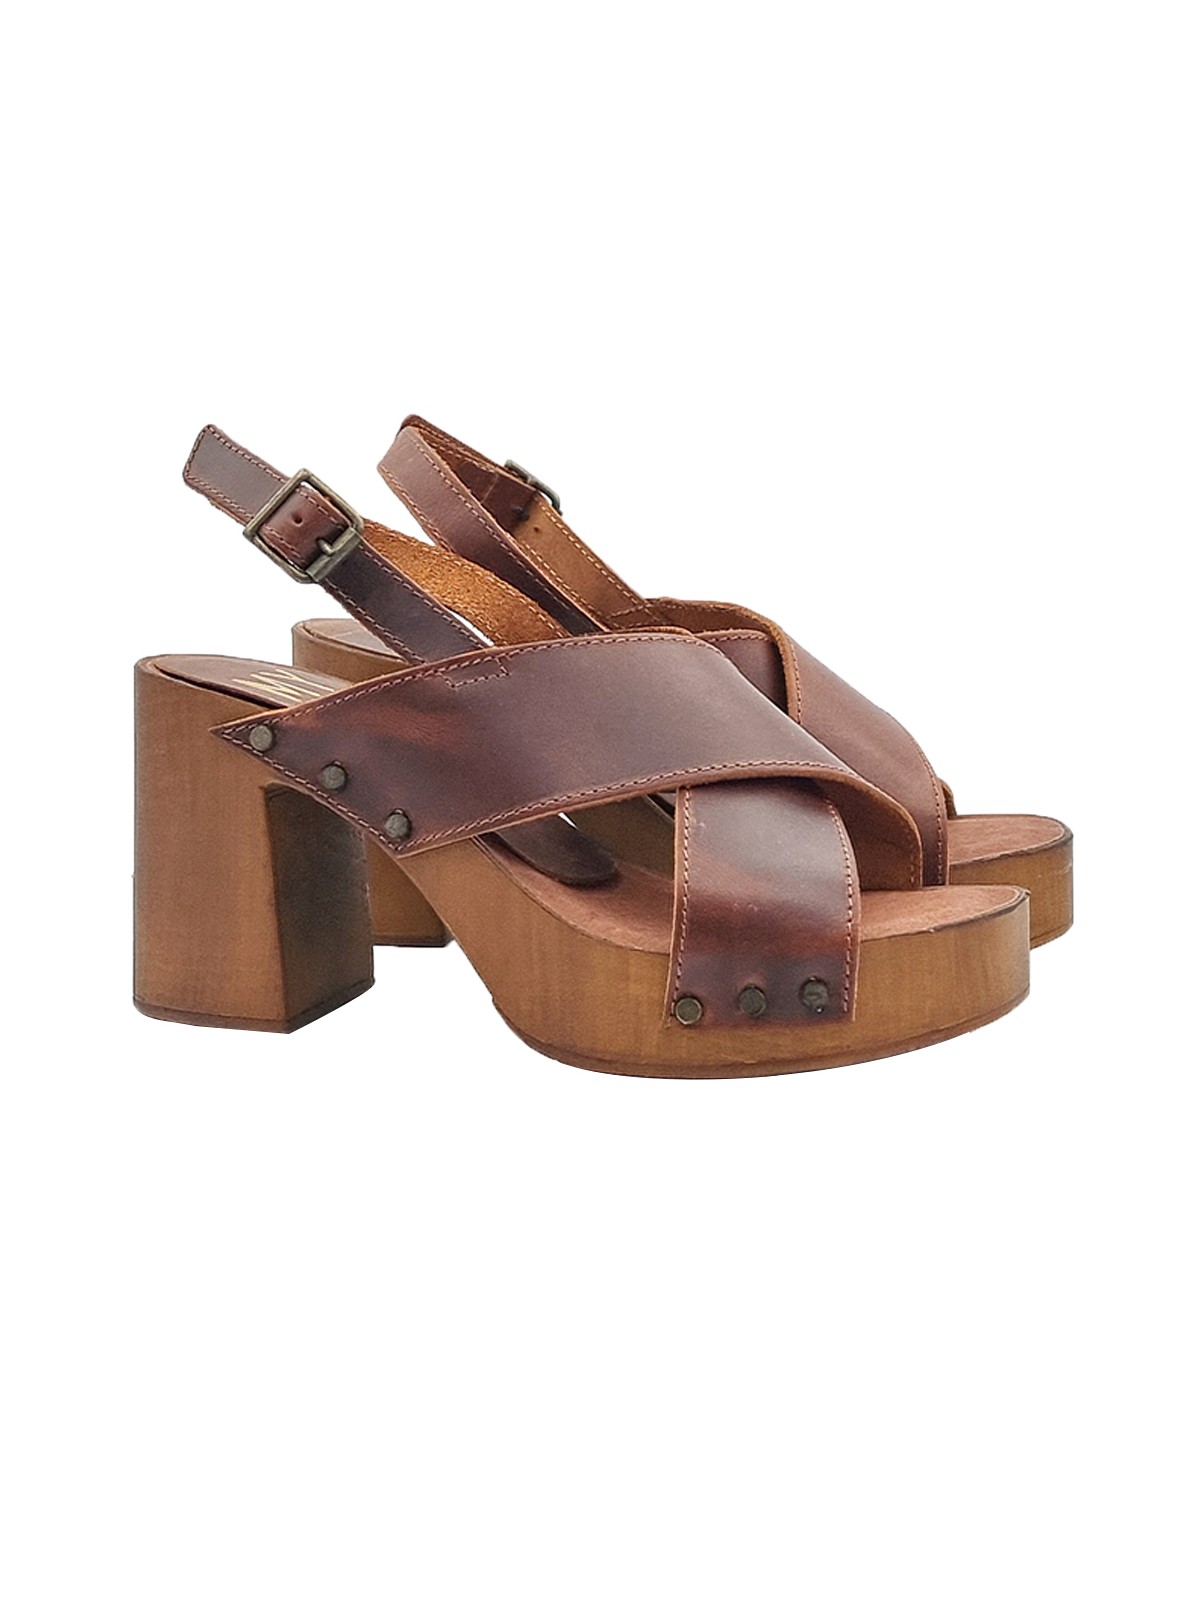 BROWN SANDALS WITH CROSSED BANDS AND HEEL 8,5